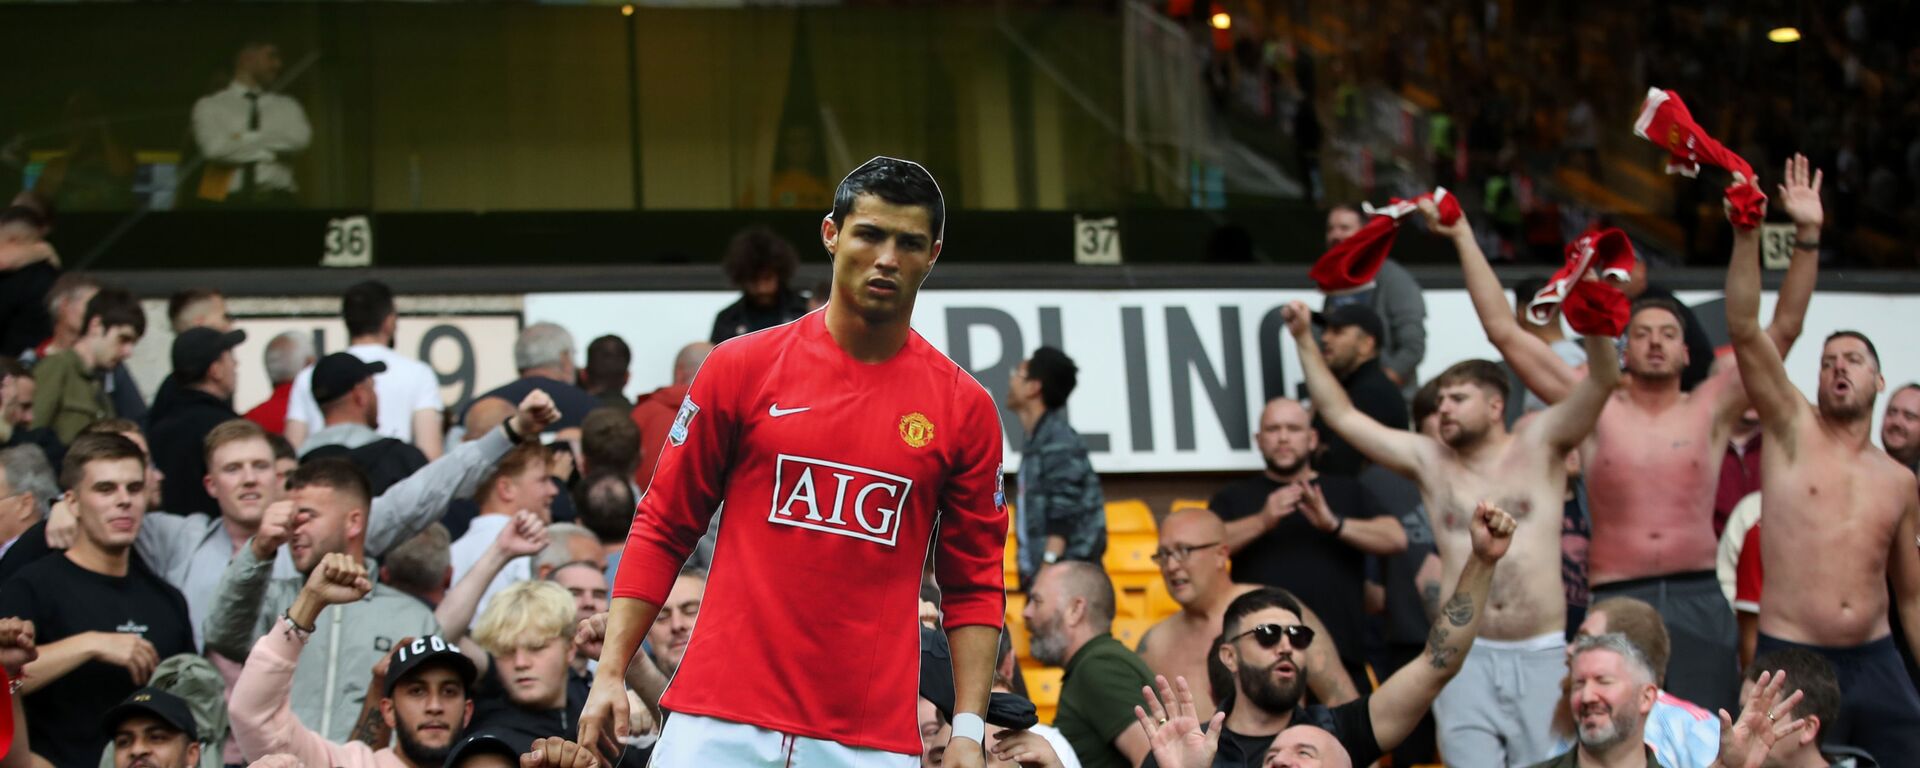 Manchester United fans hold a cutout of Cristiano Ronaldo during the game at Wolves on Sunday 29 August 2021 - Sputnik International, 1920, 02.09.2021